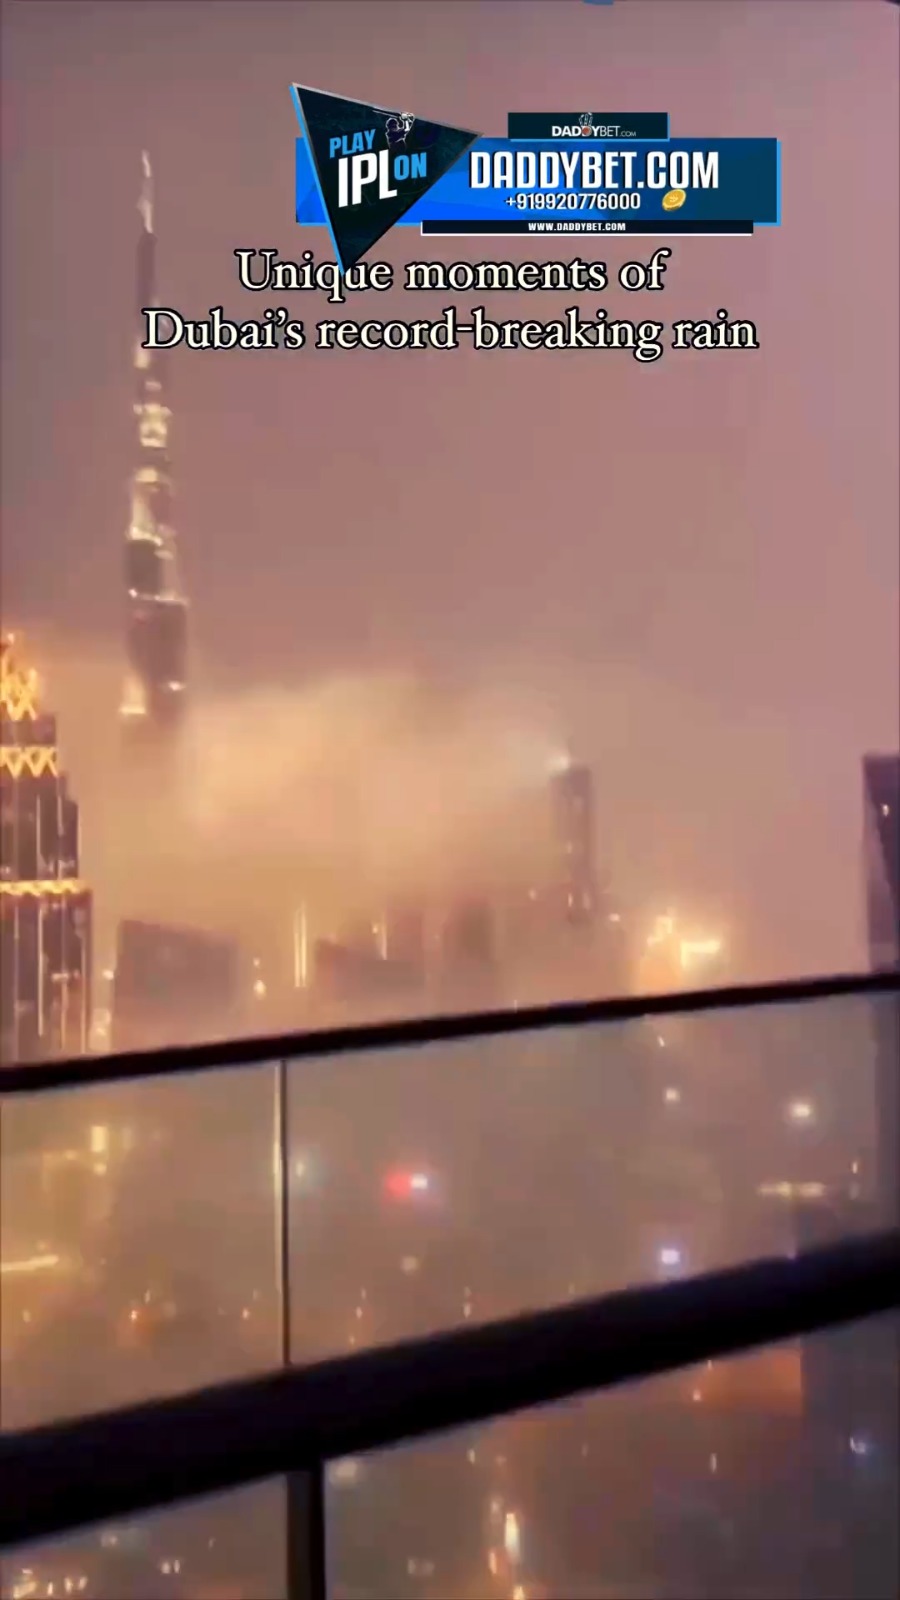 Dubai is struggling with the rains 😨